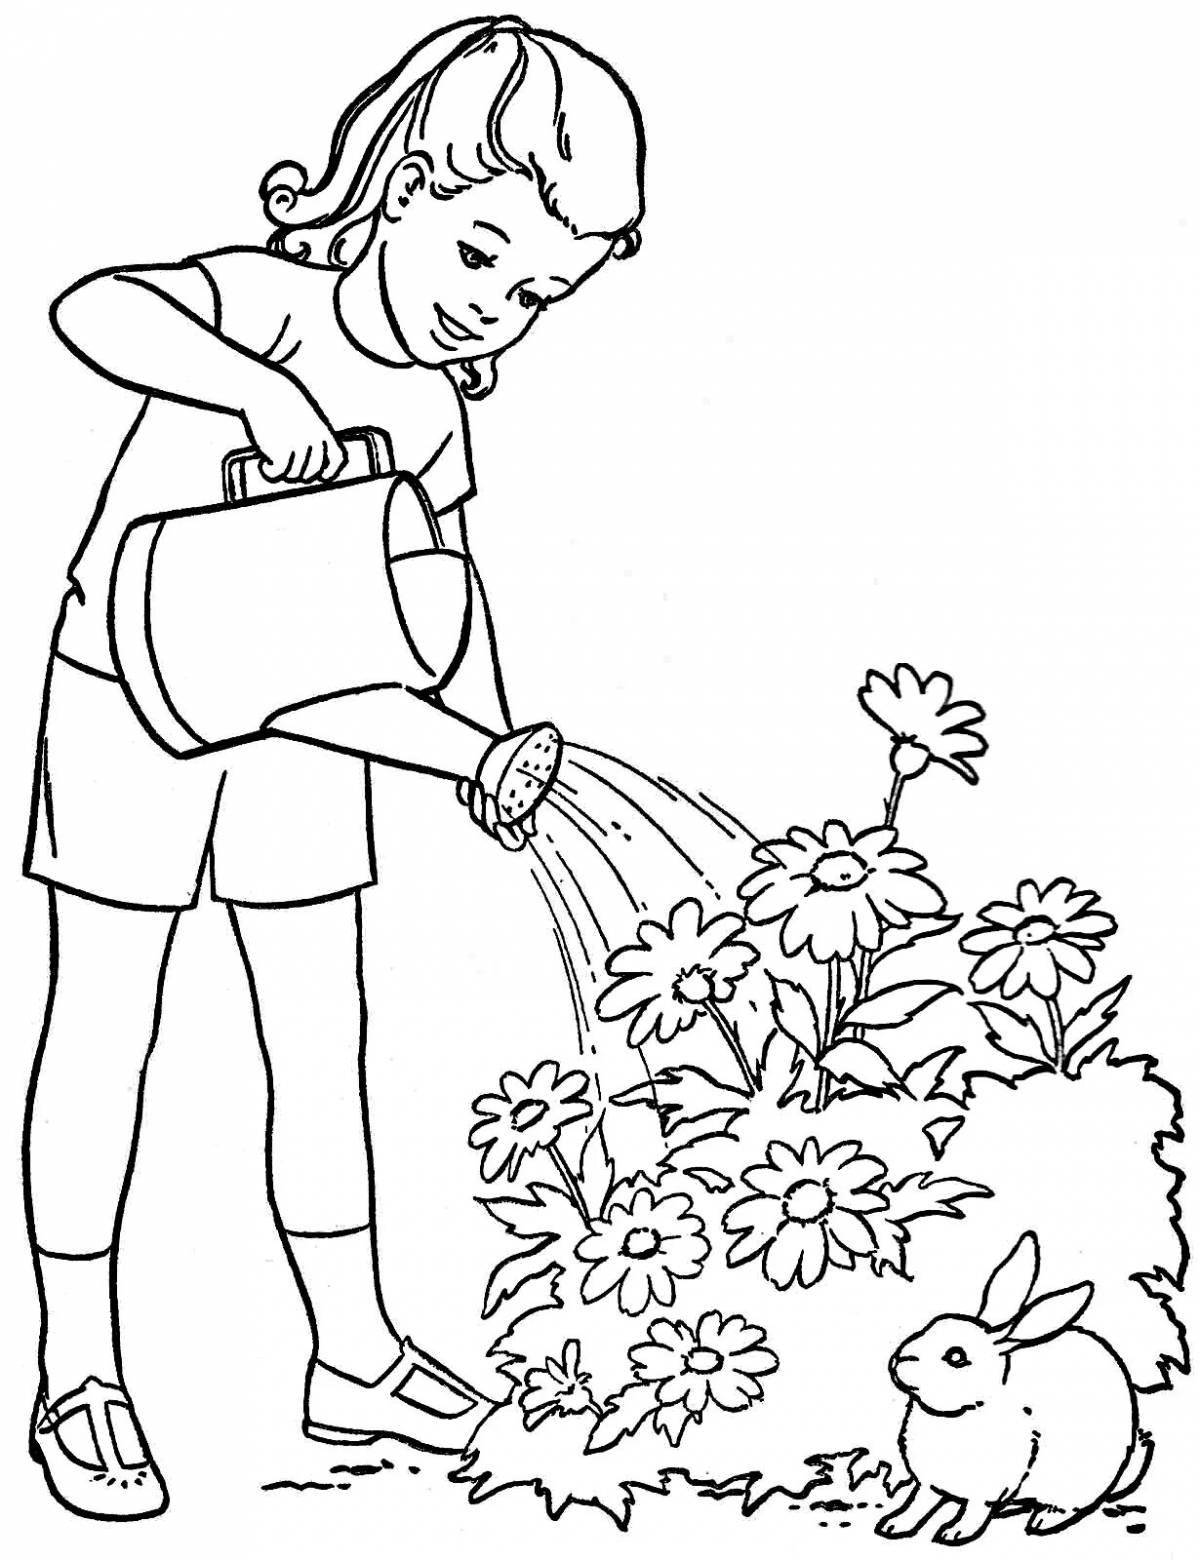 Colorful human and nature coloring page